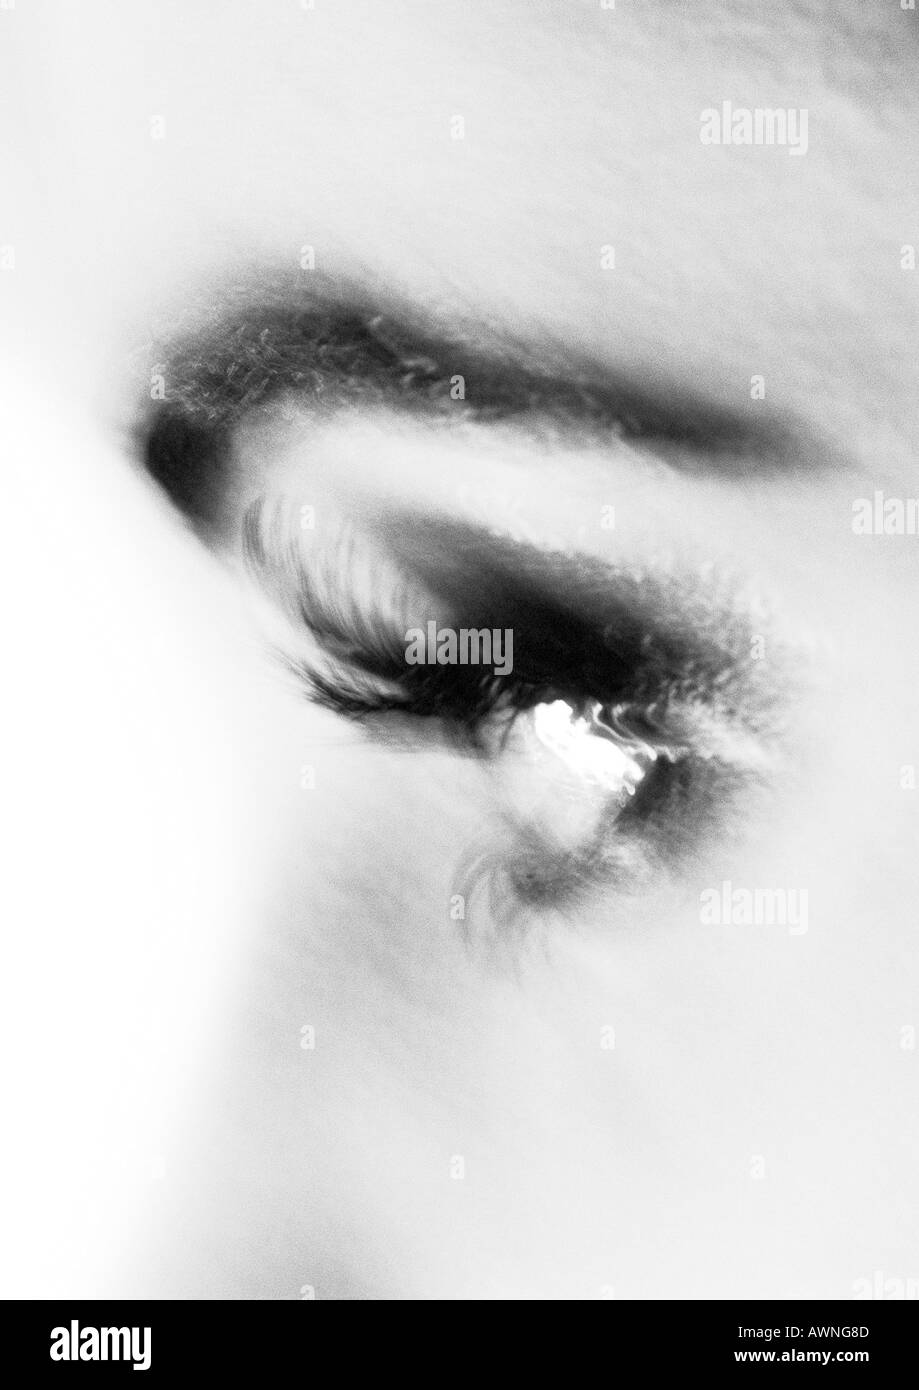 Partial view of woman's face, side view, blurred black and white. Stock Photo